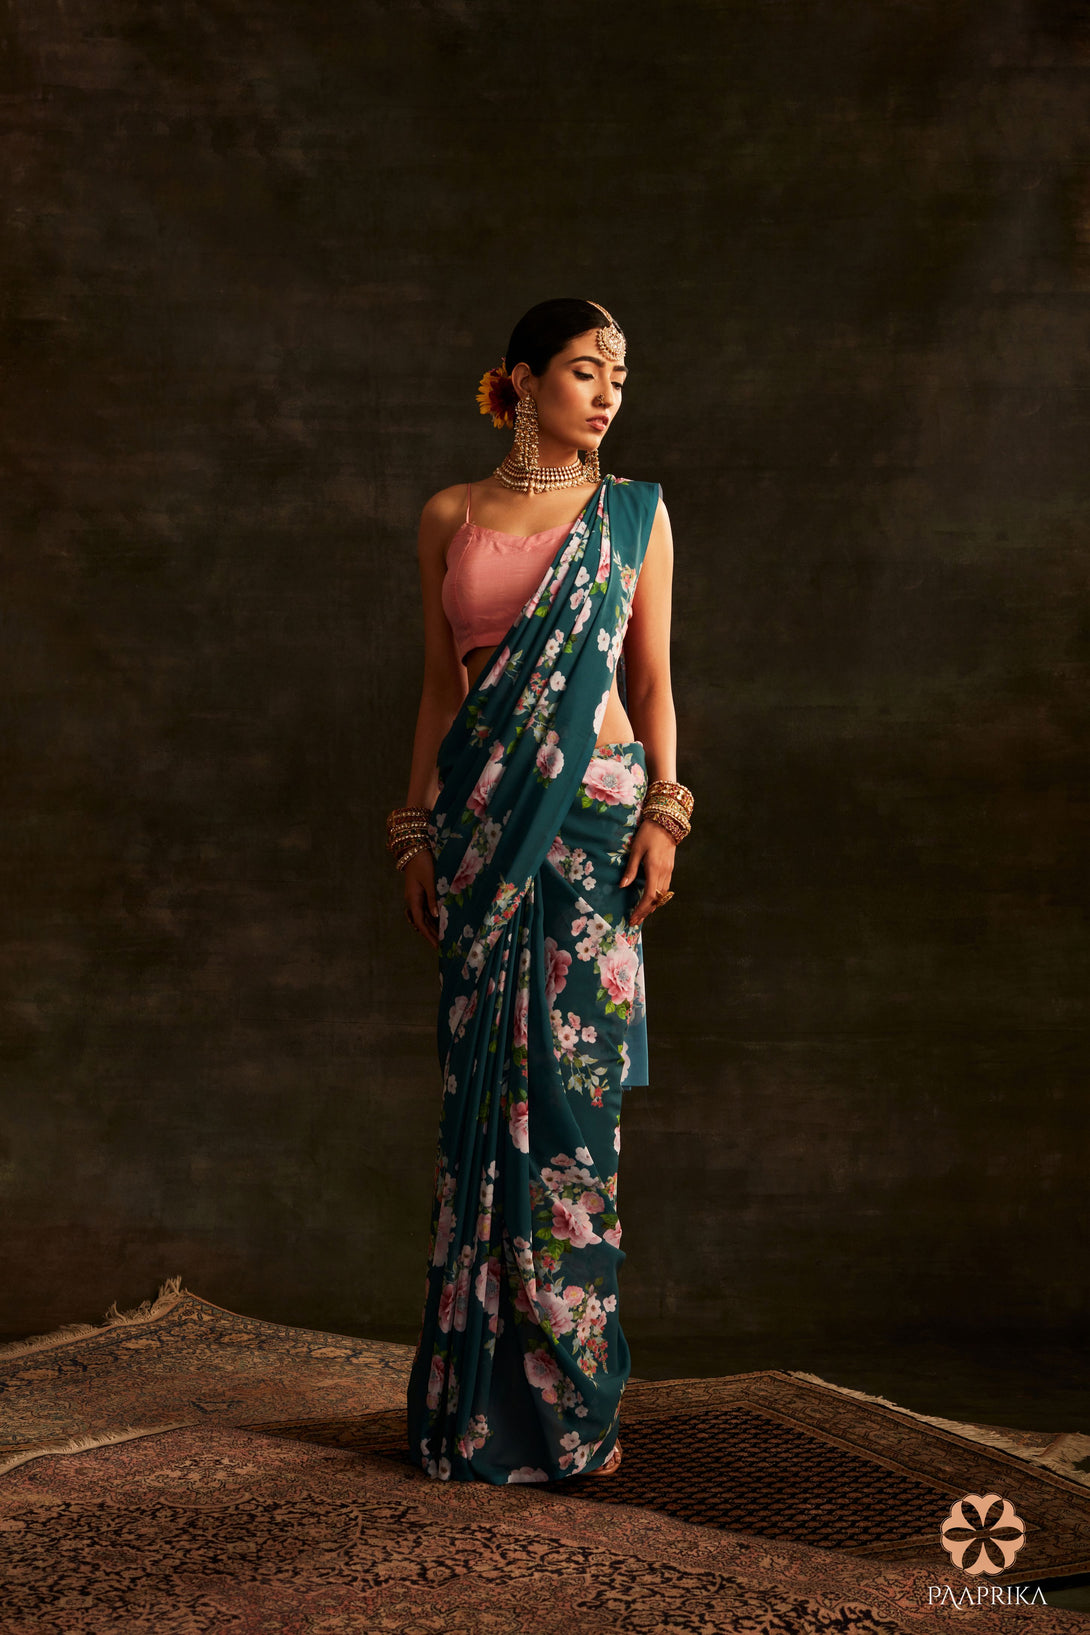 Close-up of the intricate floral print on the Exquisite Teal Green Georgette Saree. The rich teal green color and detailed floral pattern evoke a sense of serenity and elegance on the georgette fabric.